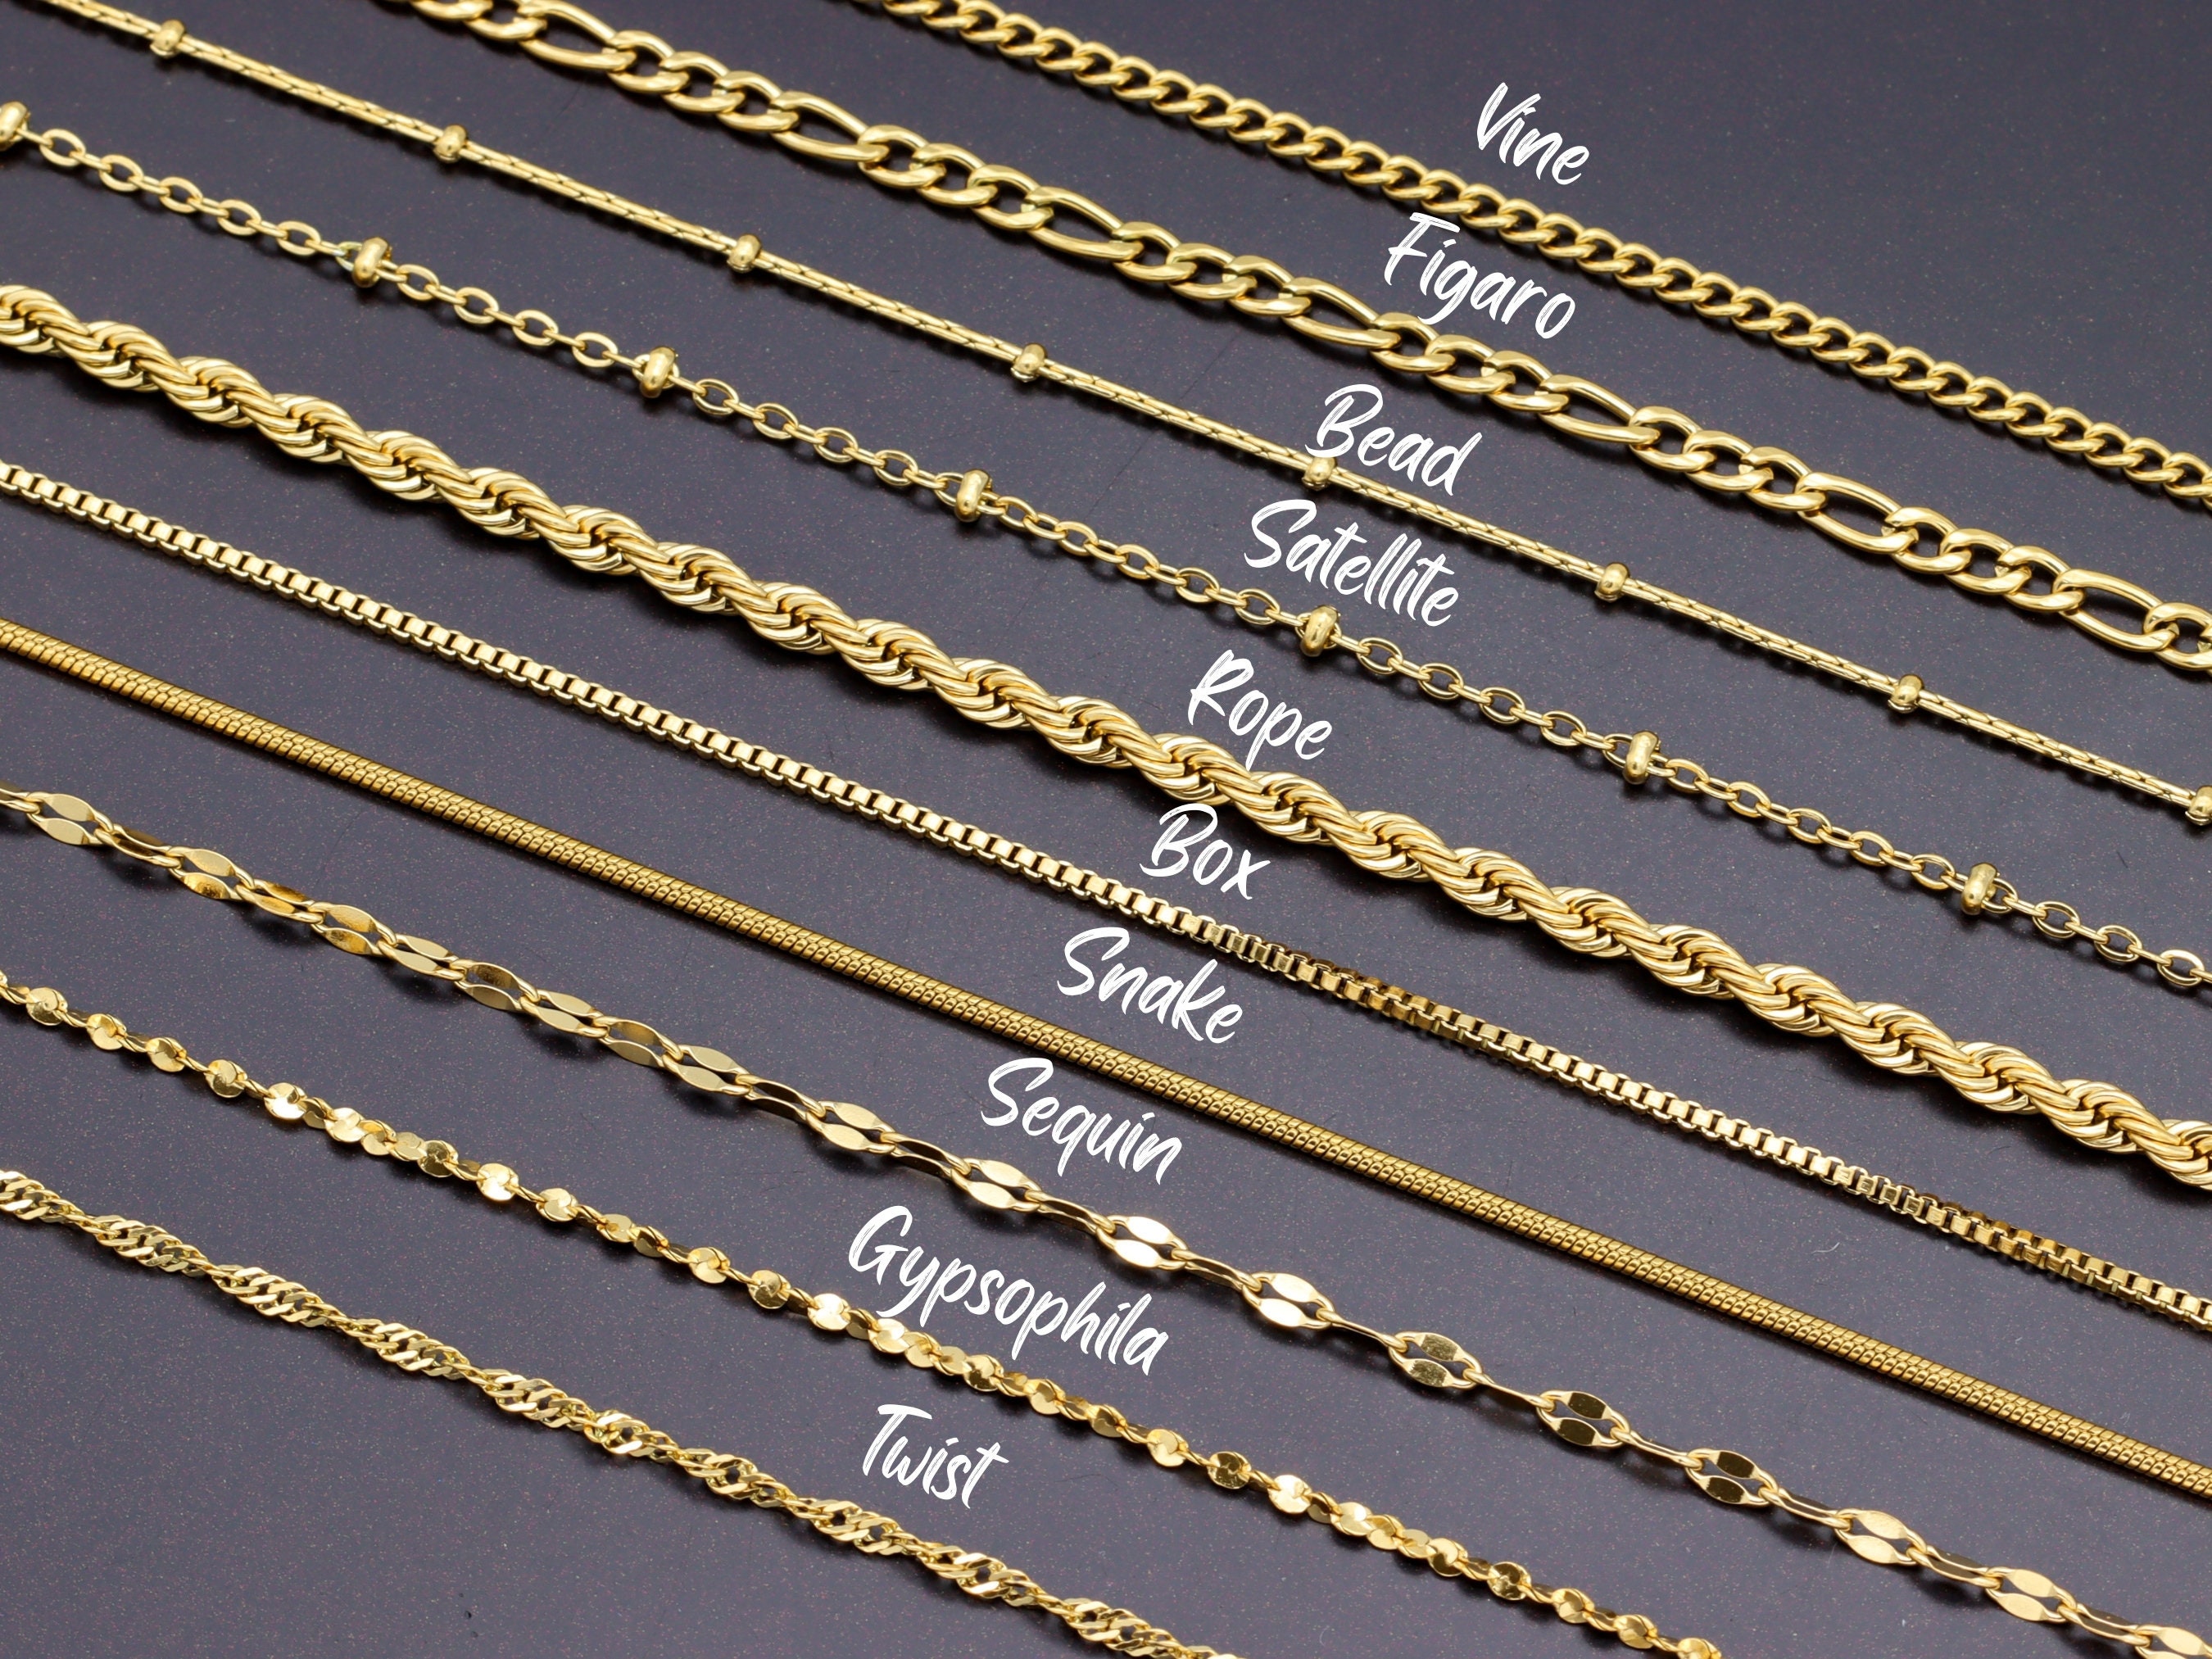 1PC Stainless Steel Silver Tone 2mm Box Chain Necklace 50cm P9F7 